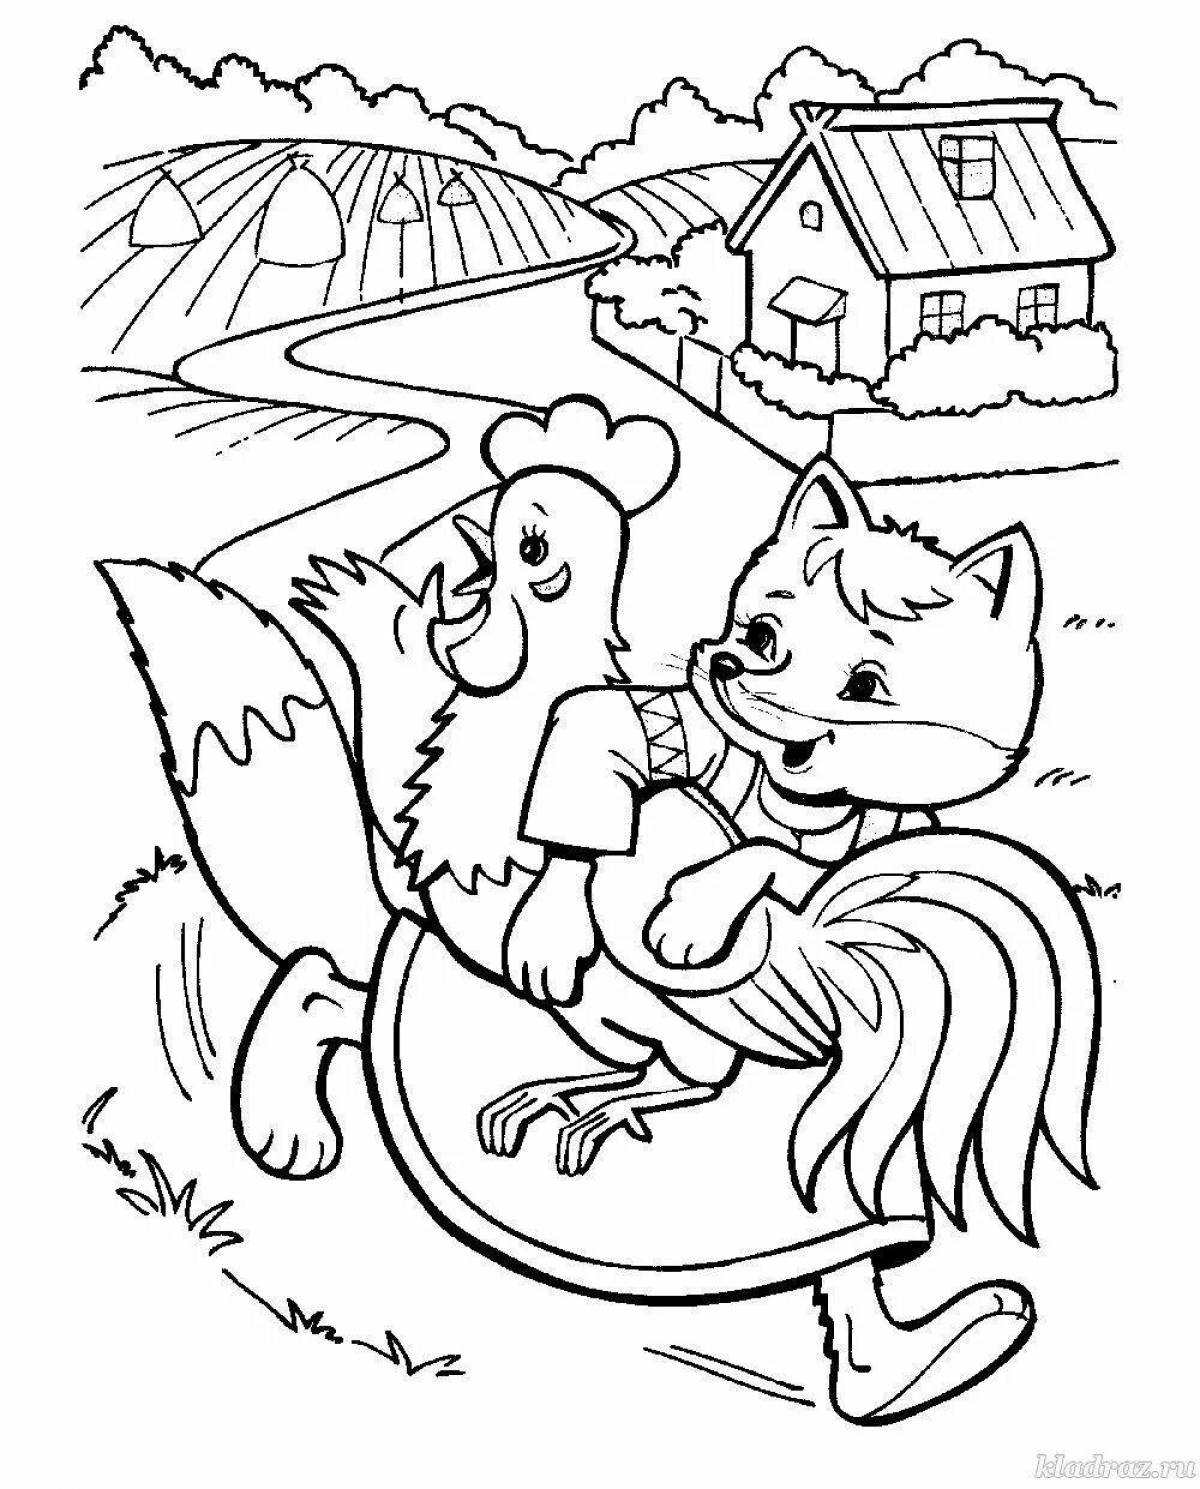 Charming coloring fox and rooster Russian folk tale